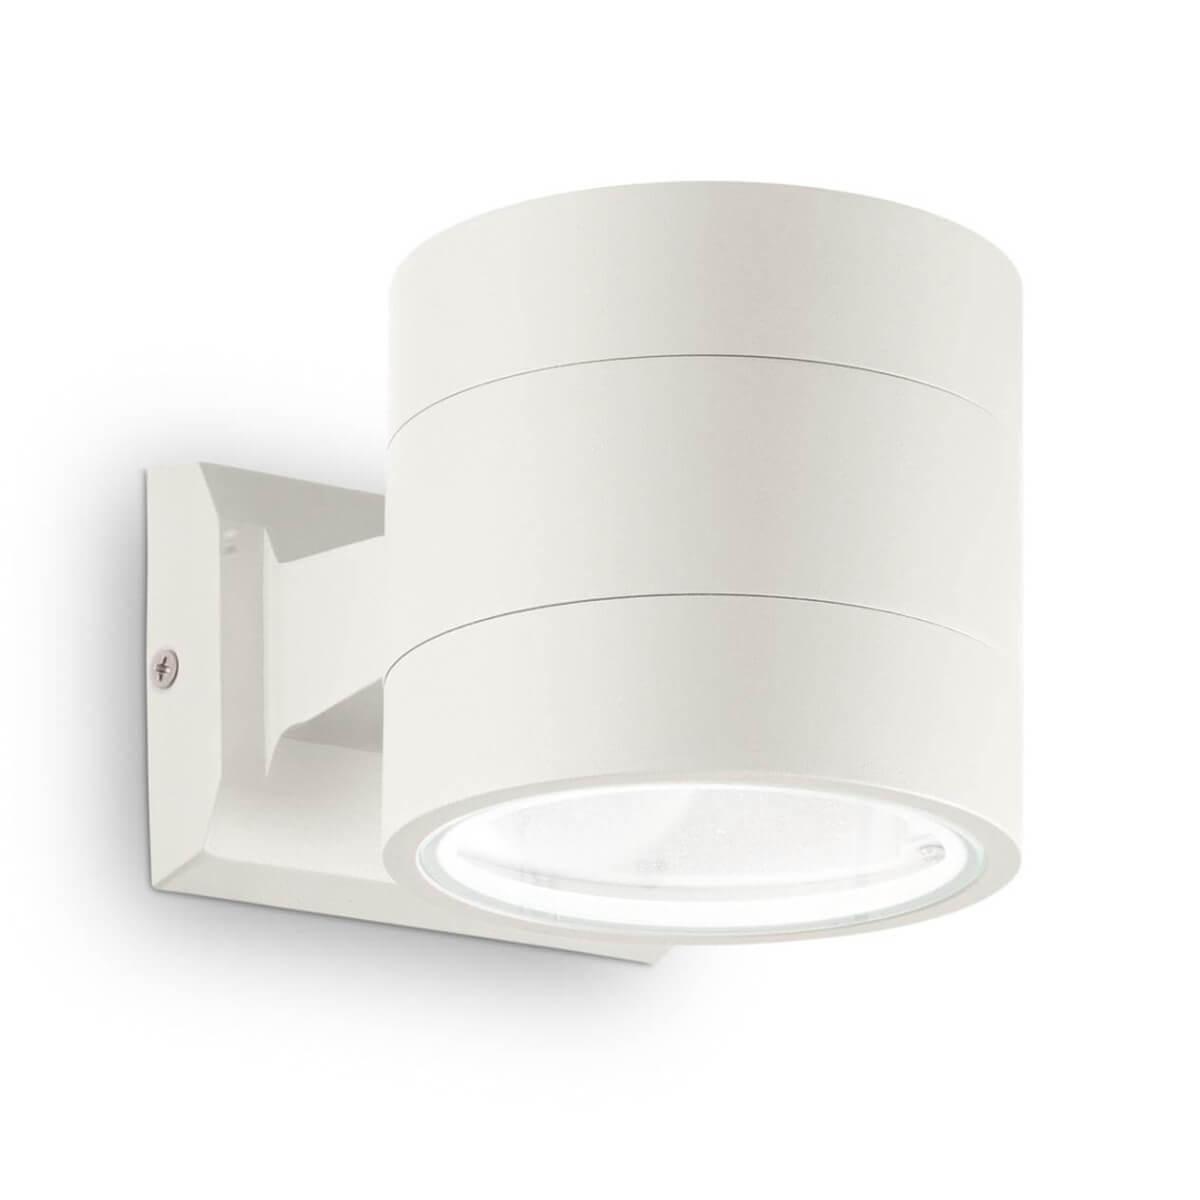    Ideal Lux Snif Ap1 Round Bianco 144283